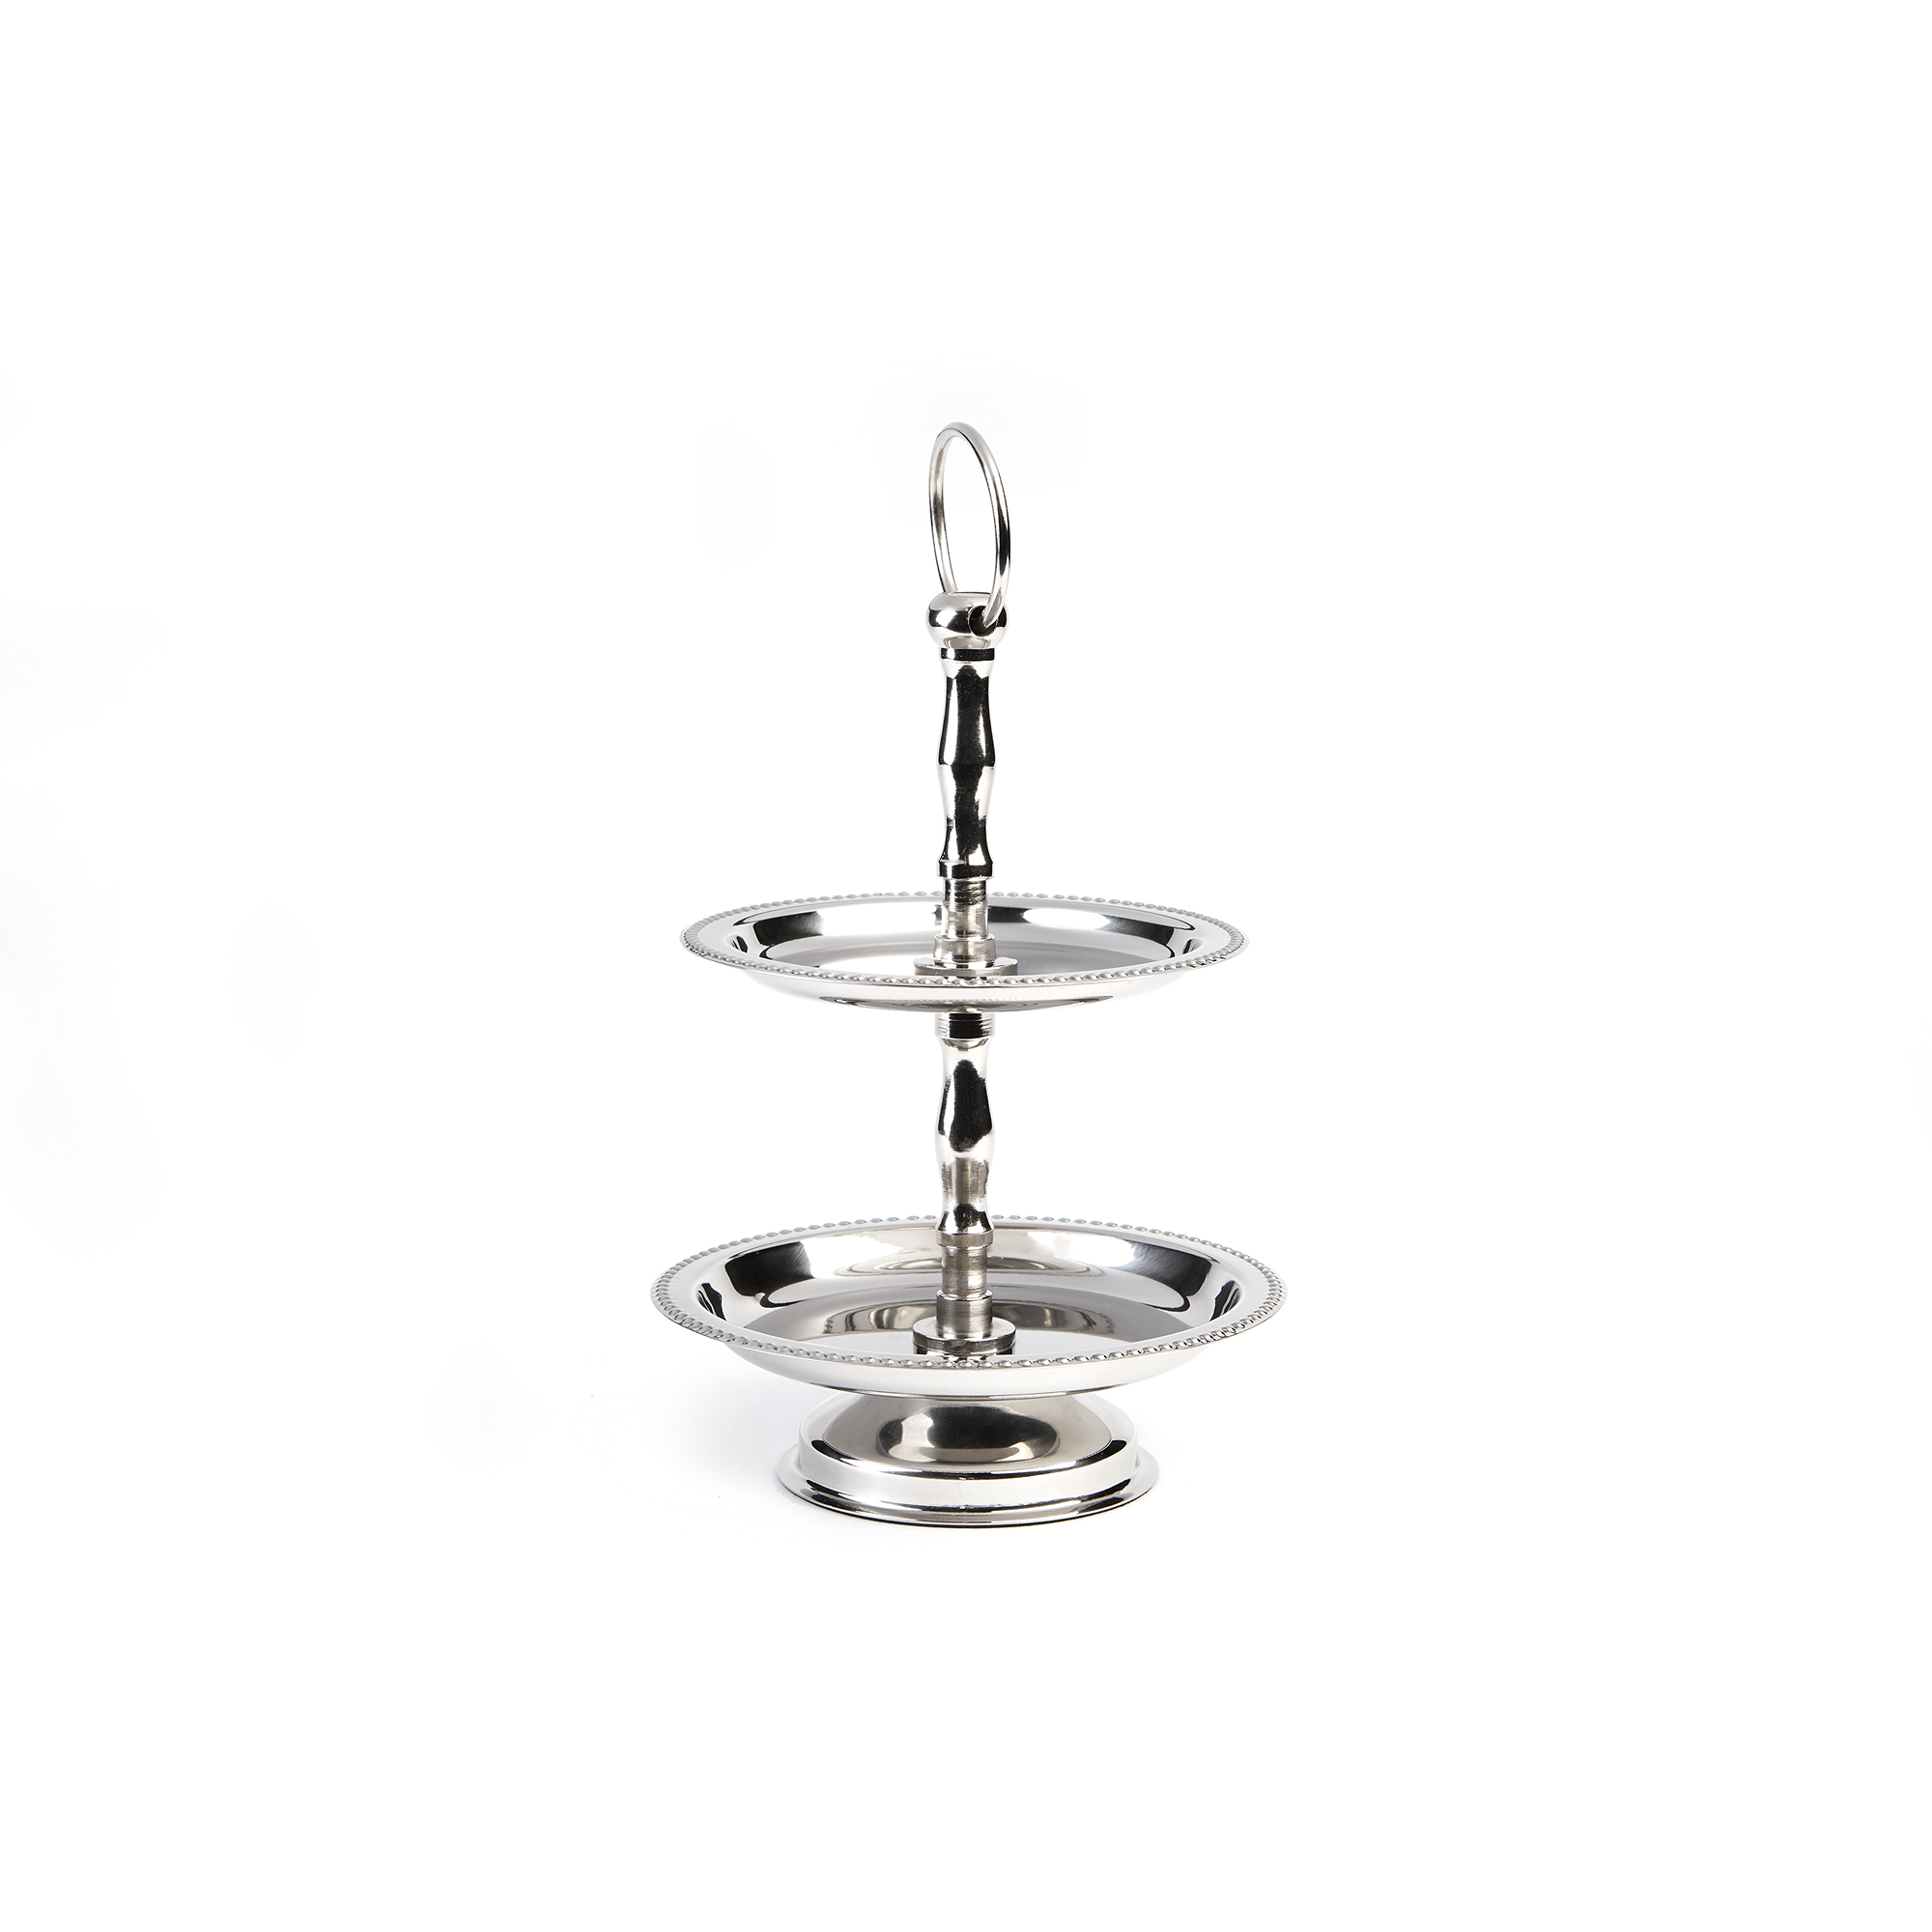 Cake Stands : Buy Cake Stands Online @Upto 70% OFF in India